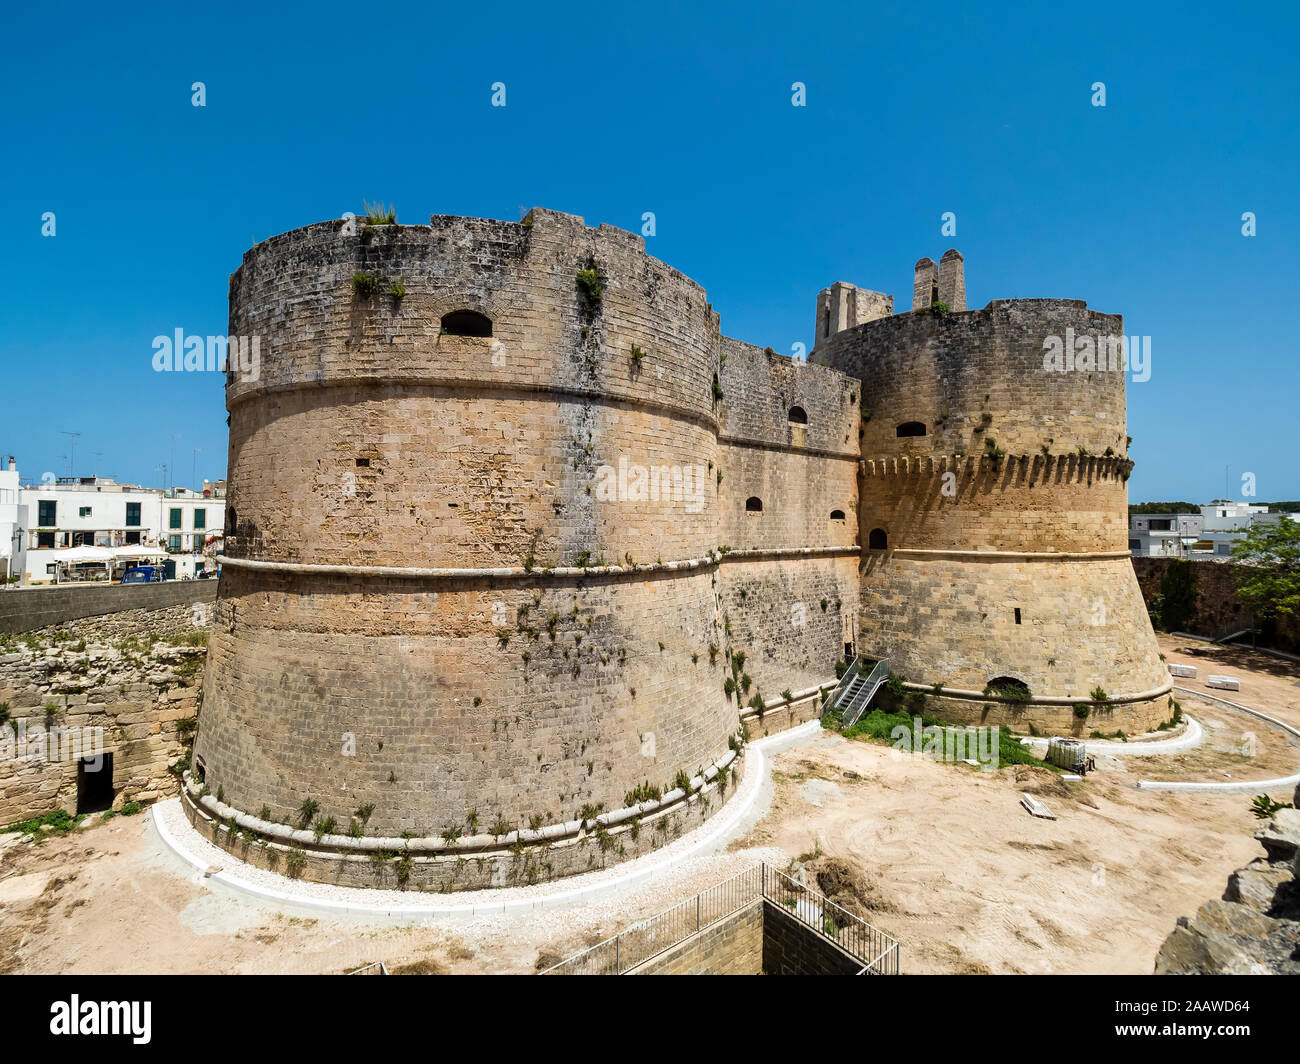 Italy, Province of Lecce, Otranto, Towers of Aragonese Castle Stock Photo